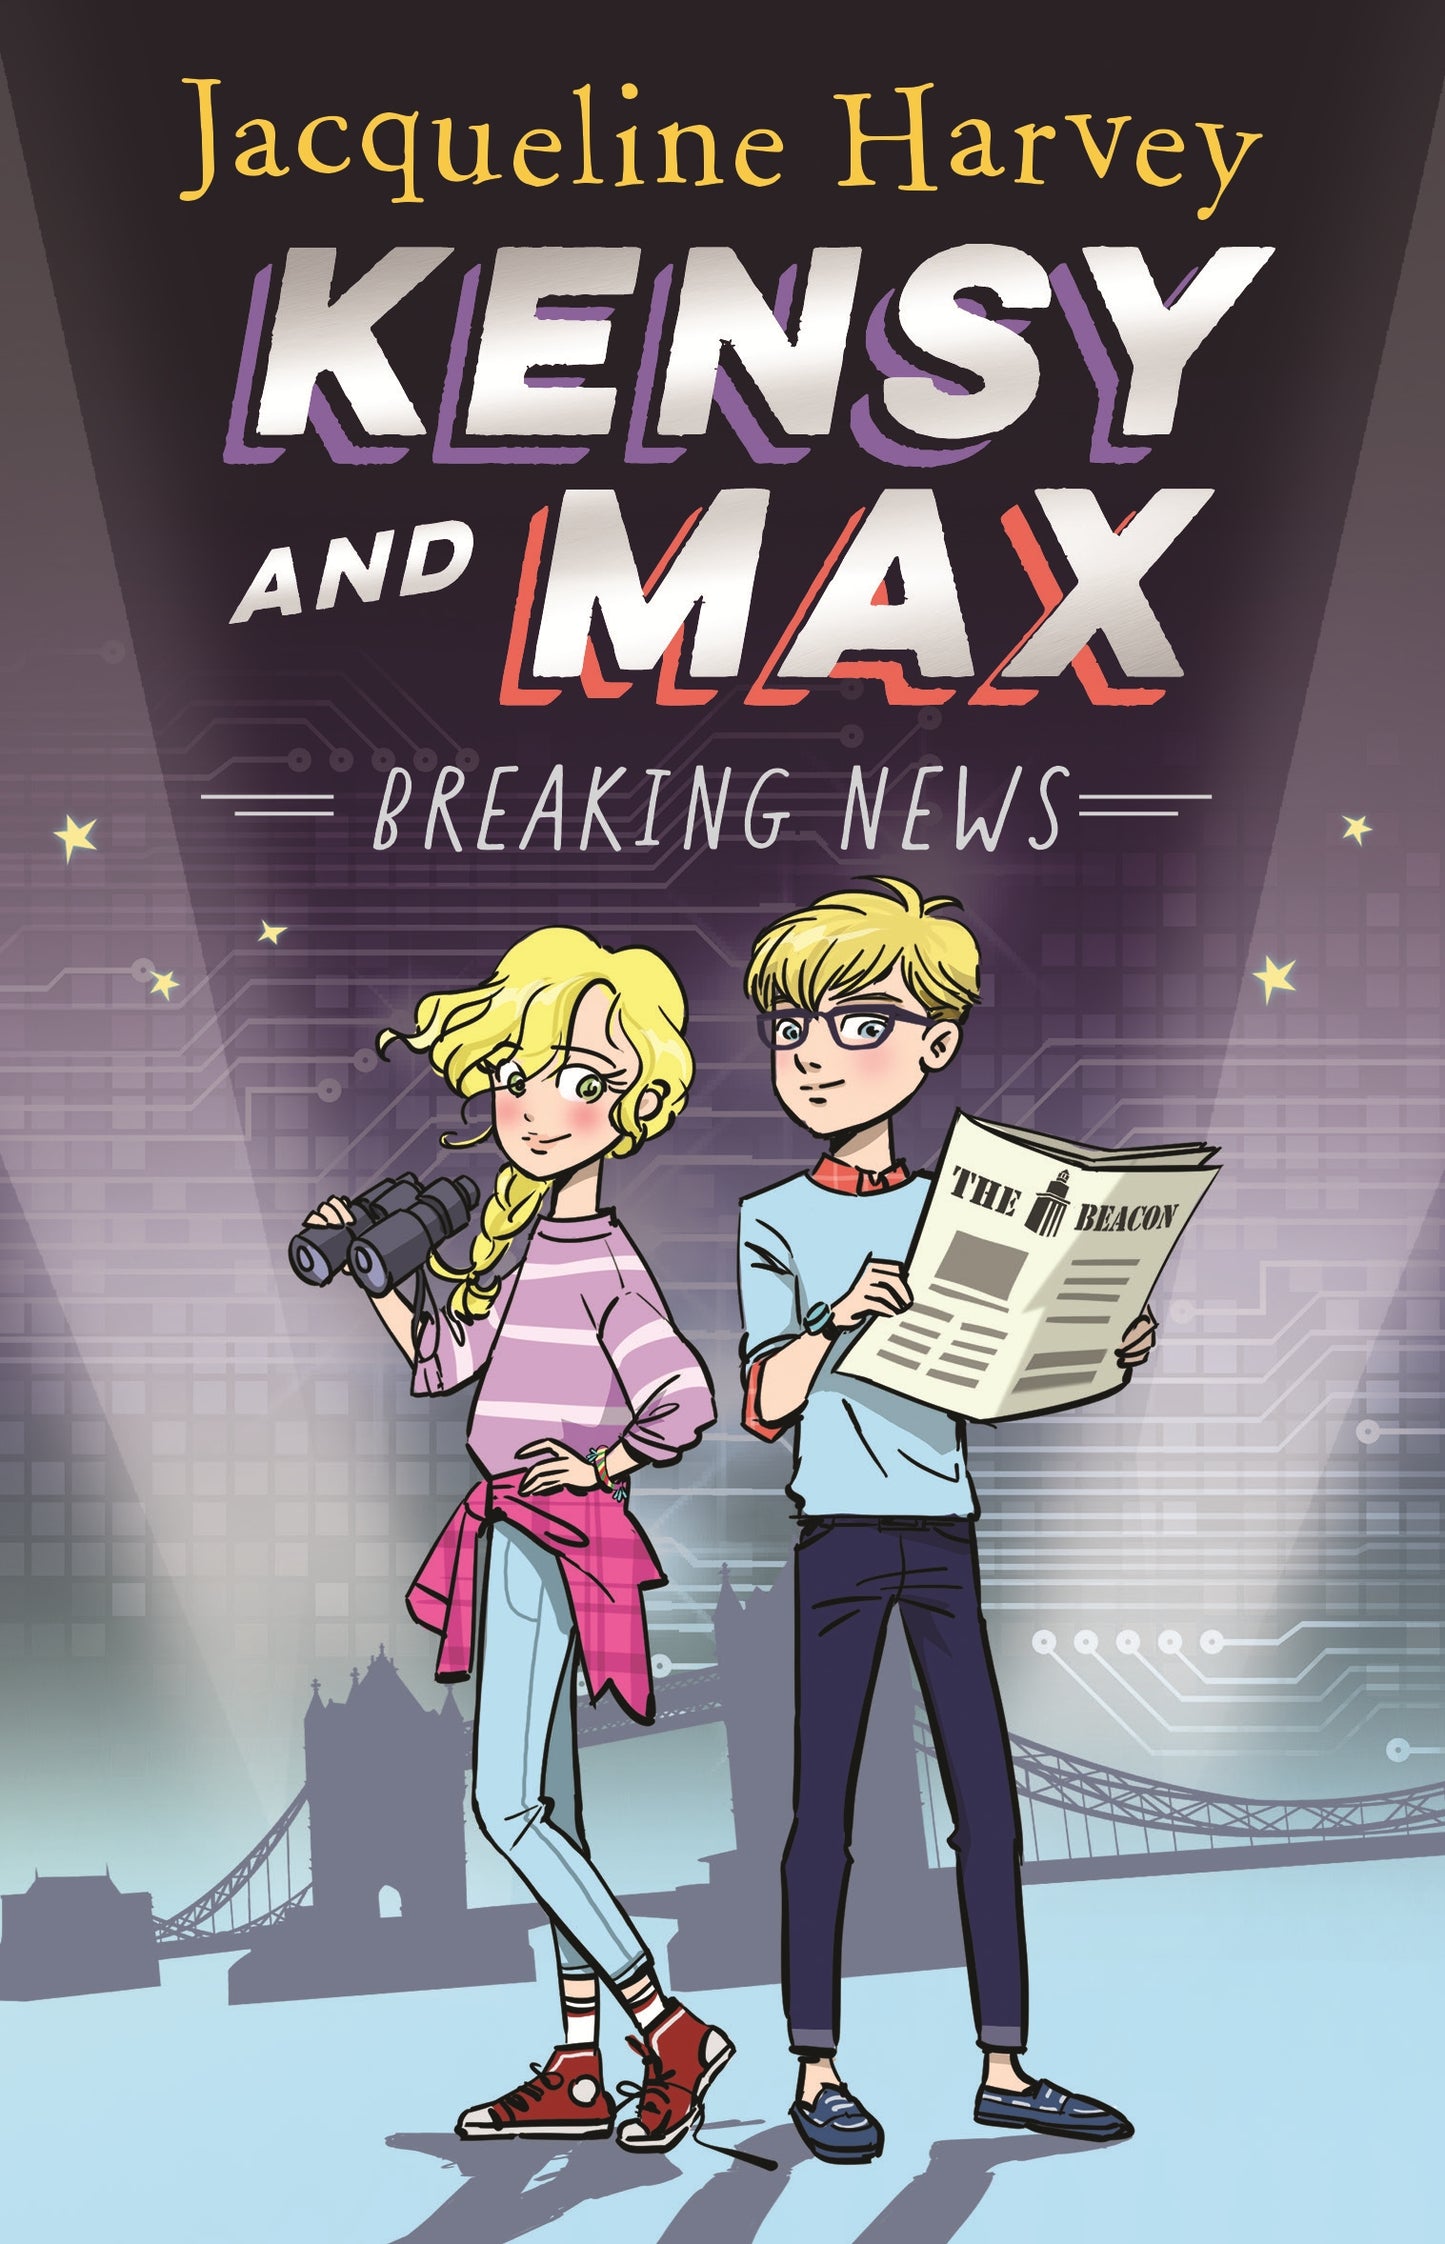 Kensy and Max 1 - Breaking News by Jacqueline Harvey